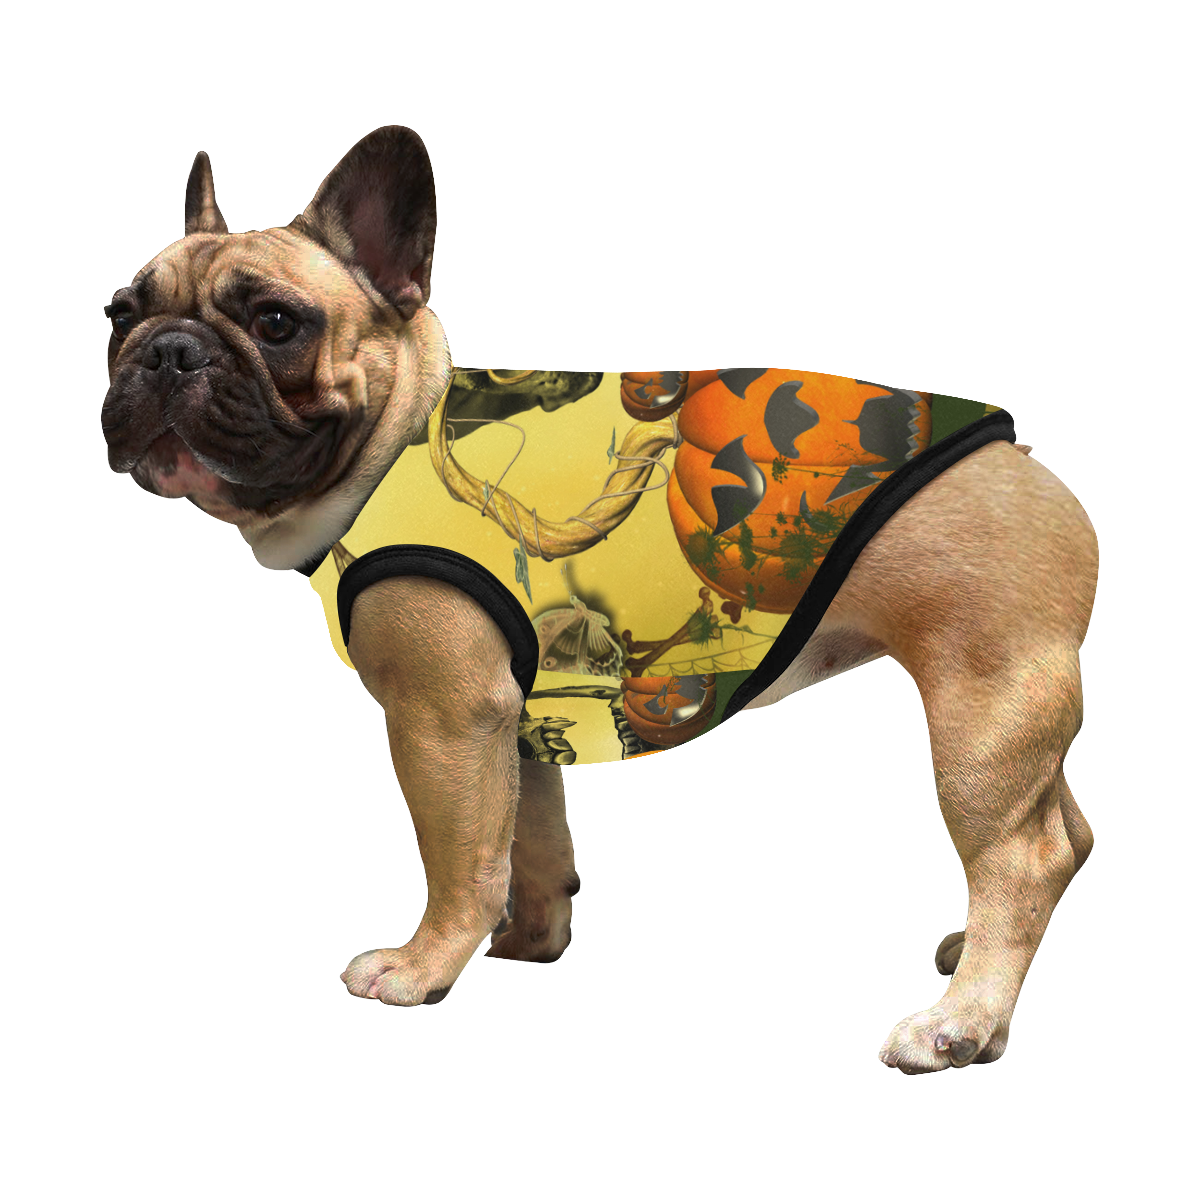 Halloween, funny pumpkins with skull All Over Print Pet Tank Top